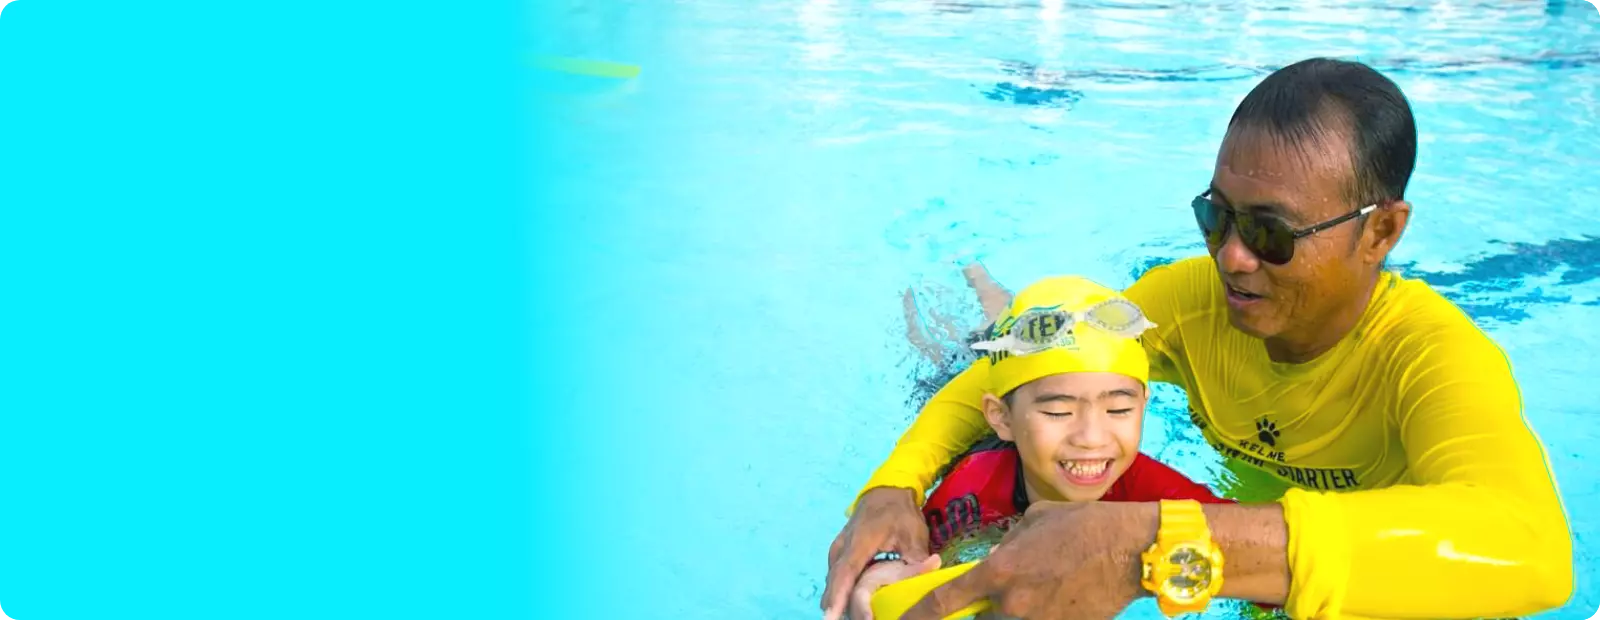 Singapore Swimming Coach is coaching a child to learn to swim in the swimming pool with a yellow swimming board during swimming lessons.